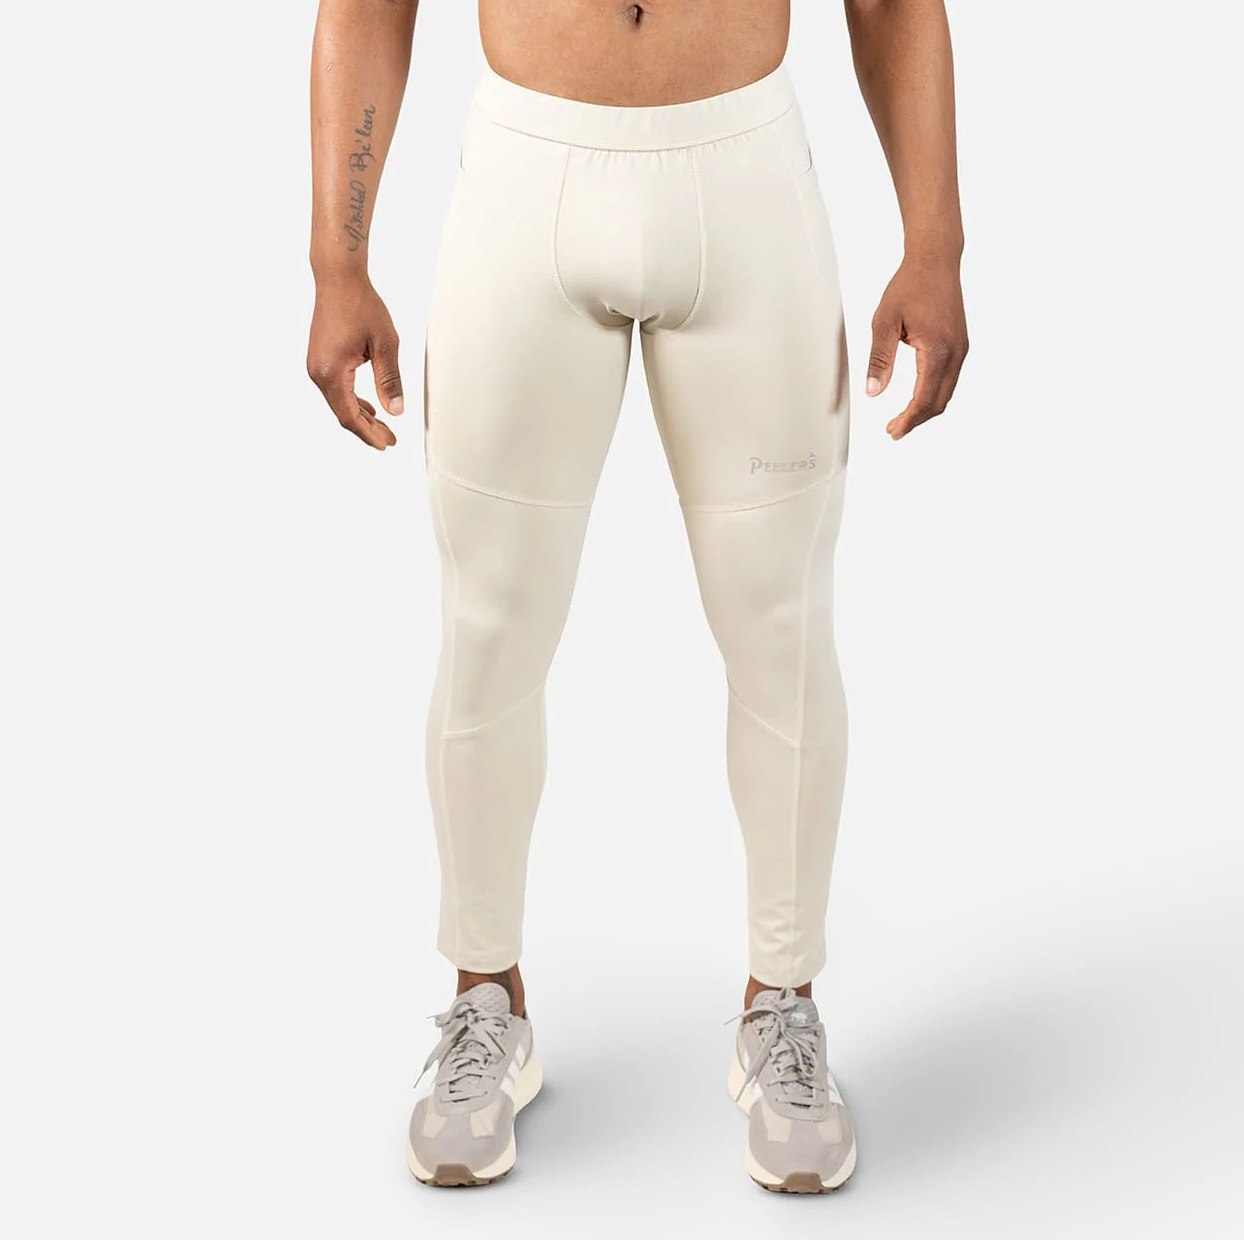 AgilityPro Compression Pant